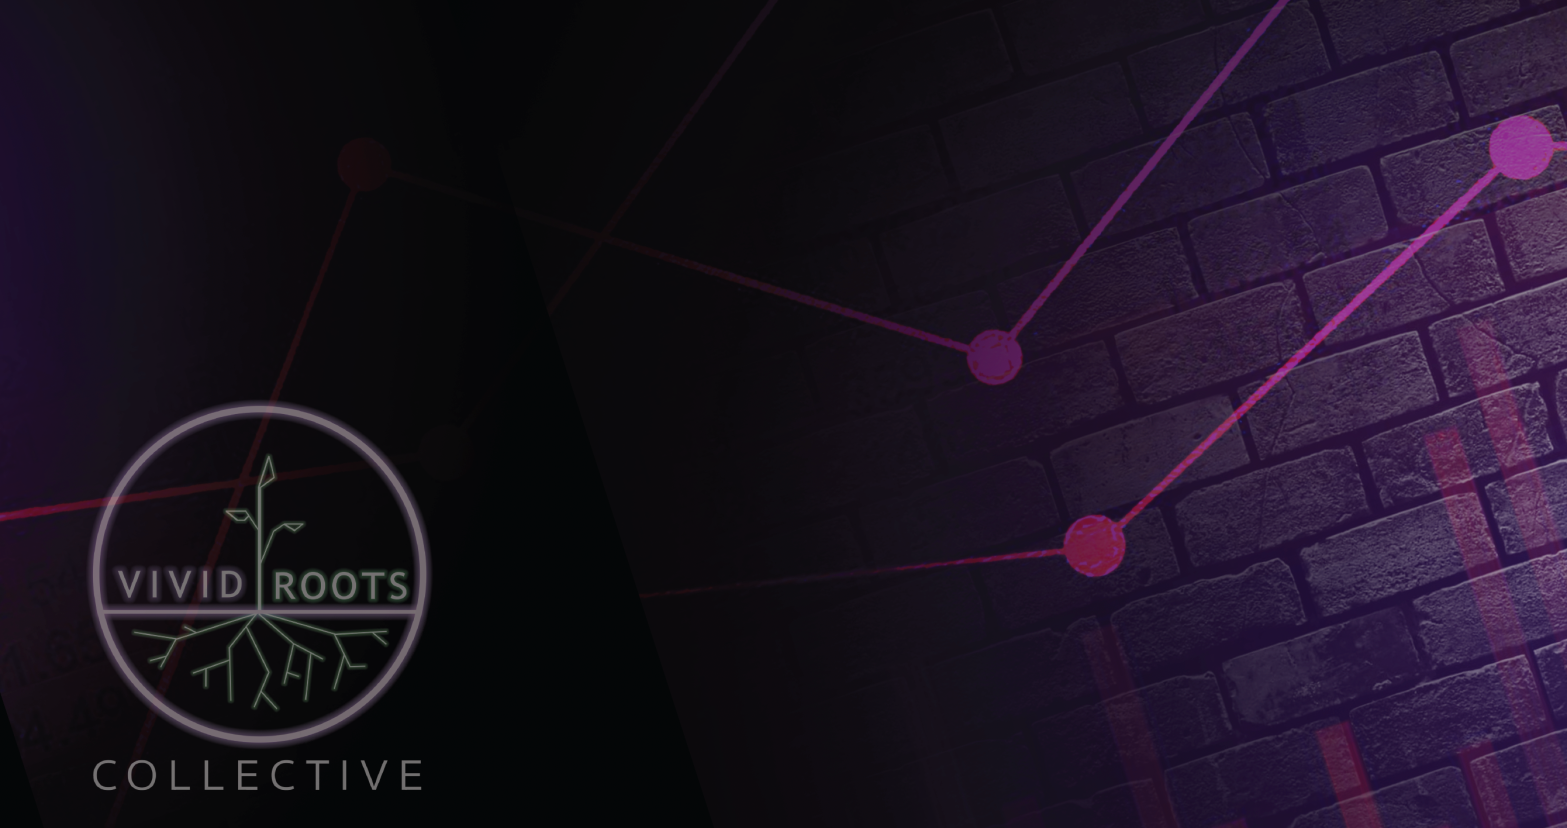 Dark purple brick background with pink line and bar graph overlay. Vivid Roots Collective logo in foreground (purple circle with a line cutting across horizontally. Above the purple 'earth' line is a green sapling shape, below the purple 'earth' line are green roots shapes).